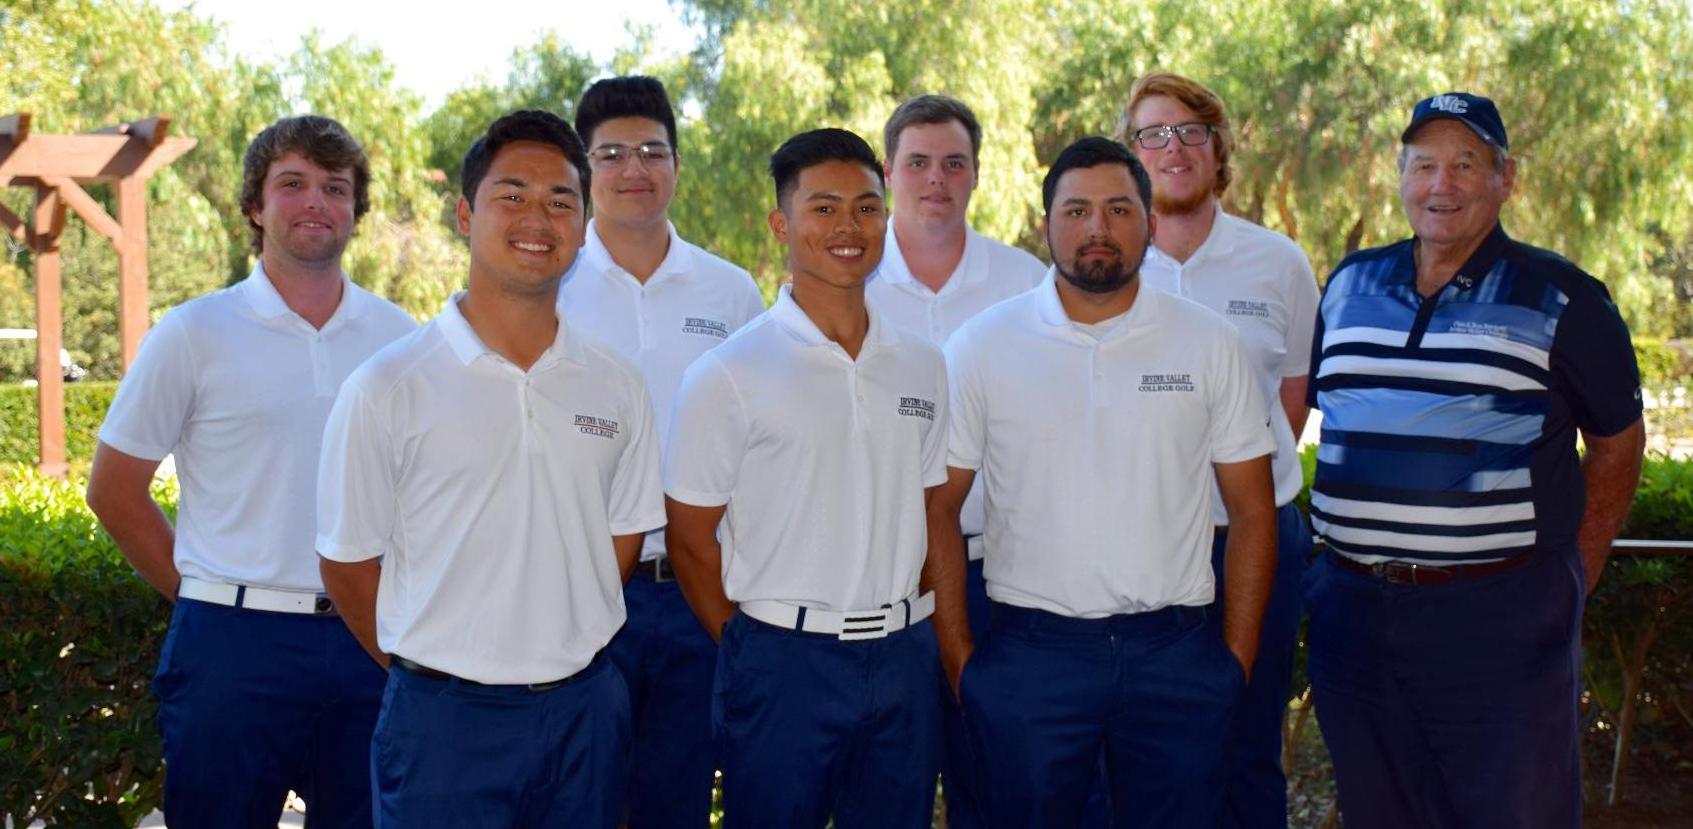 Men's golf team looking to improve in conference play